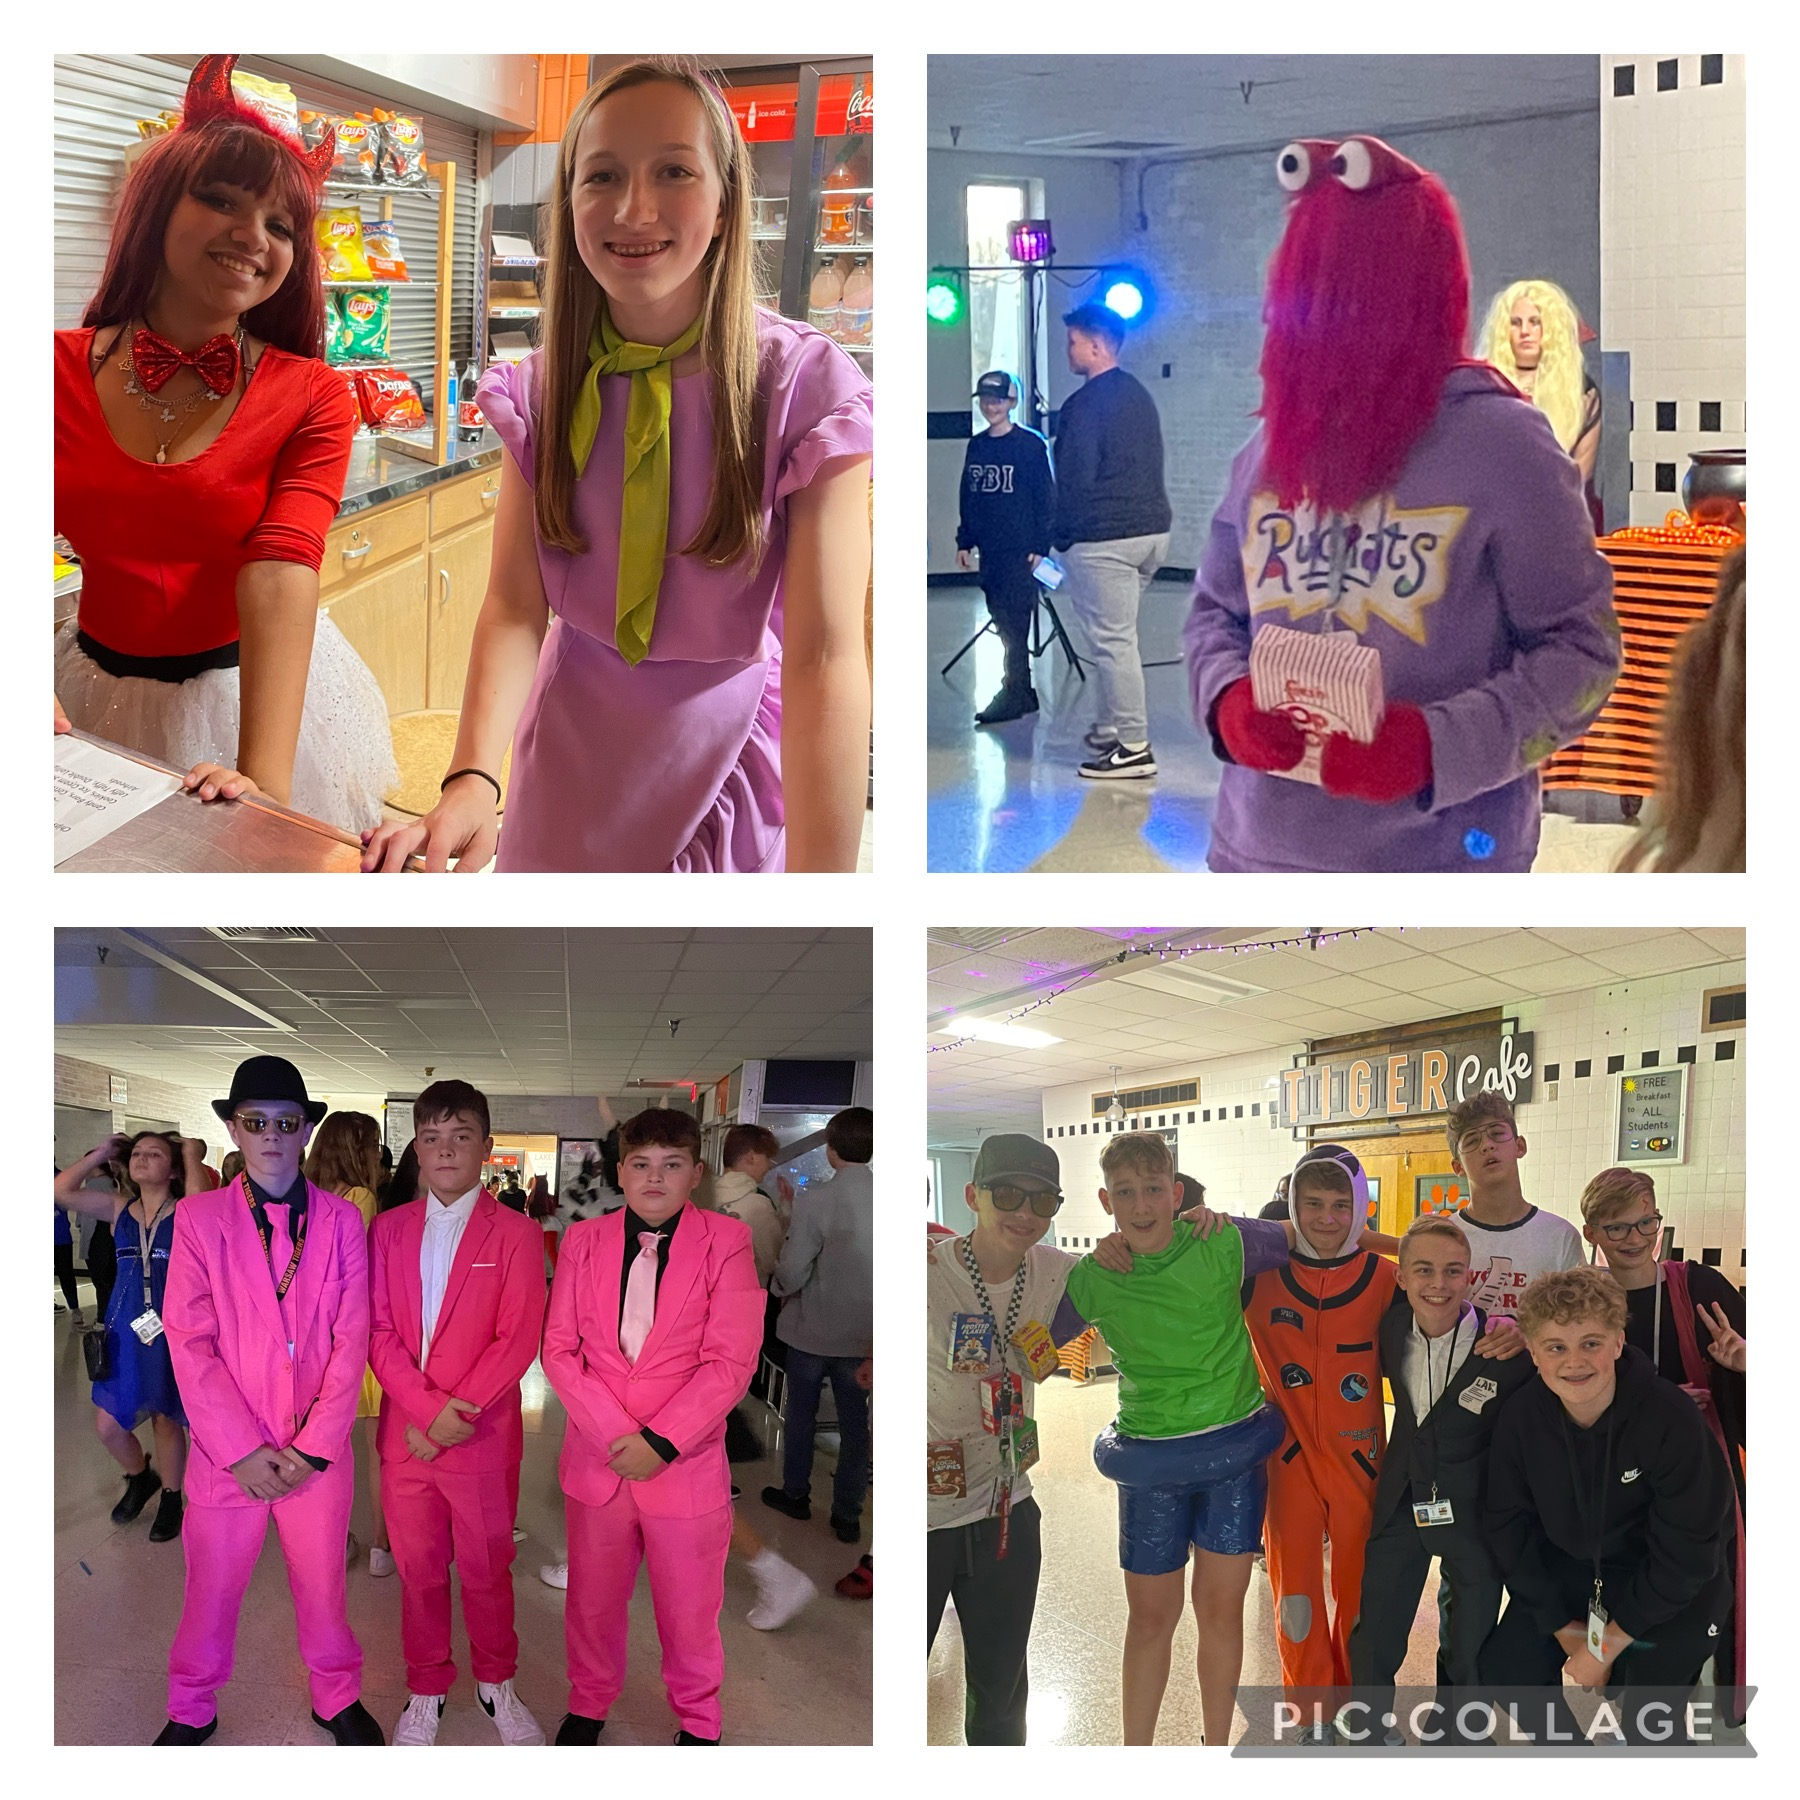 Students posing in their halloween costumes; velma and daphne from scooby doo, a red elmo monster, three young men in bright pink suits, and a group of students surrounding an astronaut